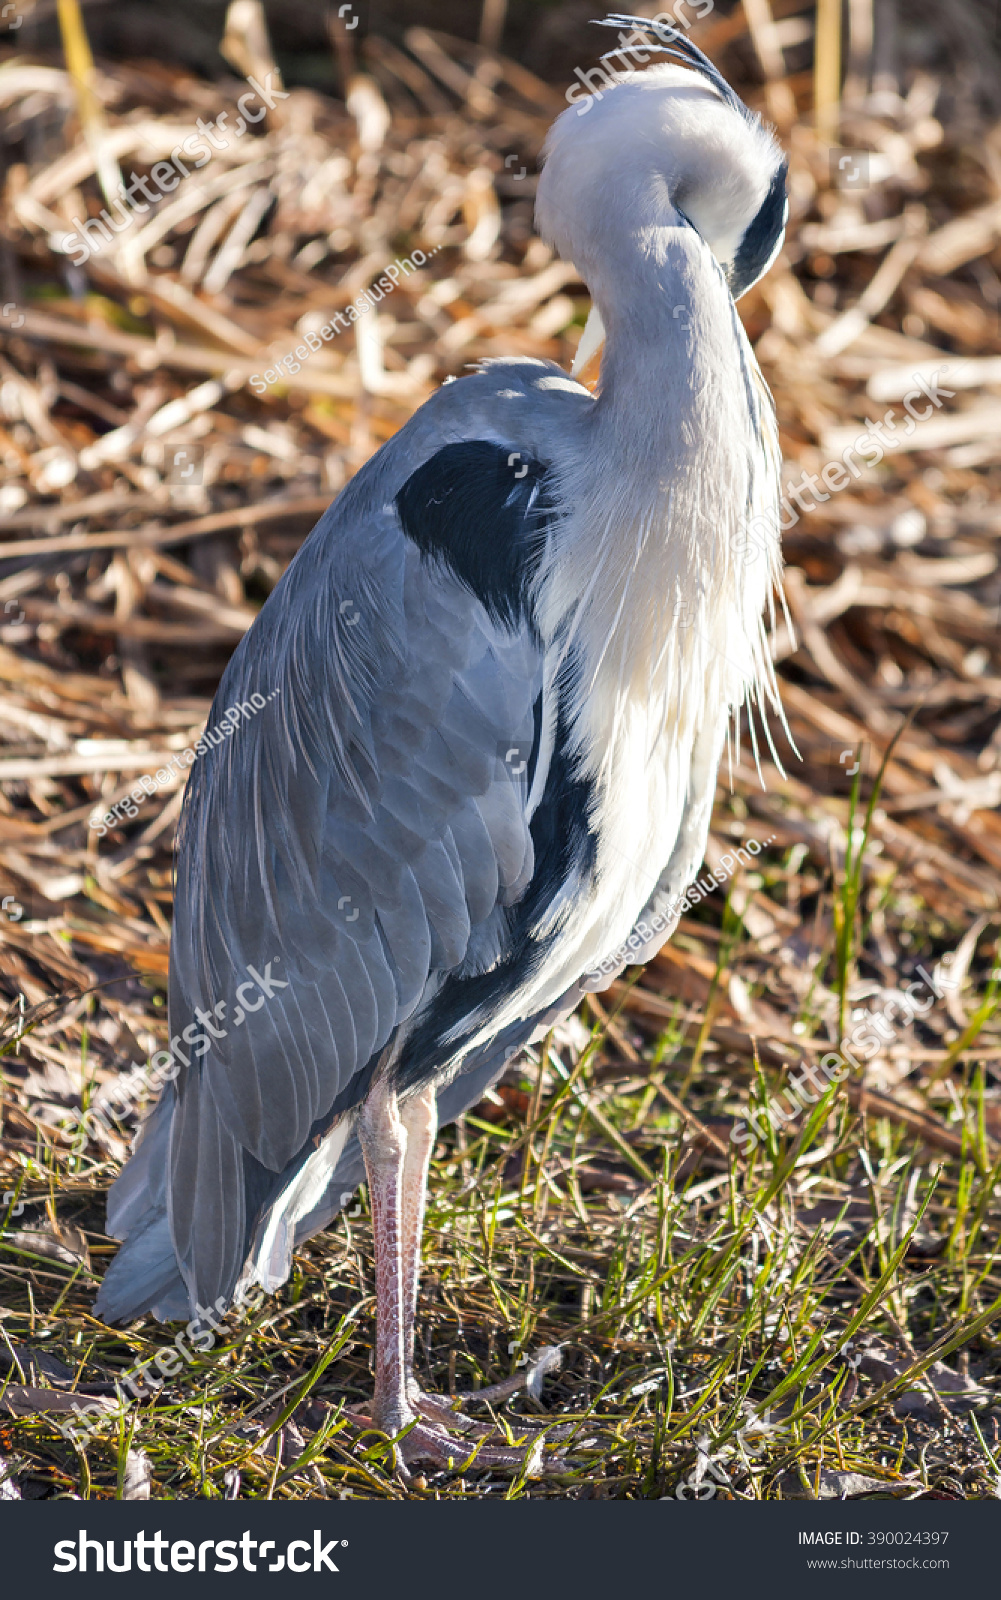 The grey heron, aka Ardea cinerea, is a wading bird of the heron family Ardeidae, native throughout temperate Europe and Asia and also parts of Africa #390024397